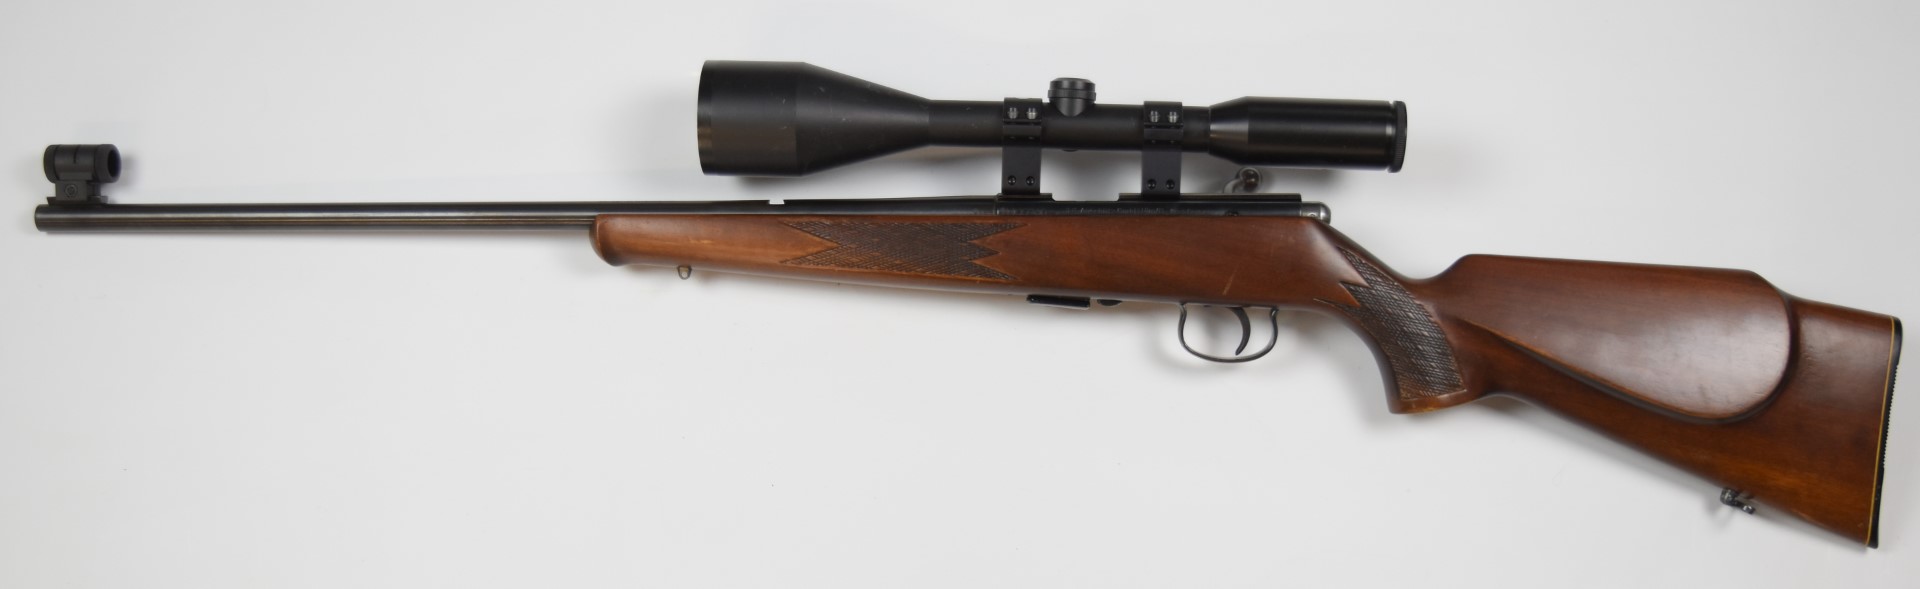 Anschutz .22 bolt-action rifle with chequered semi-pistol grip and forend, raised cheek piece to the - Image 6 of 9